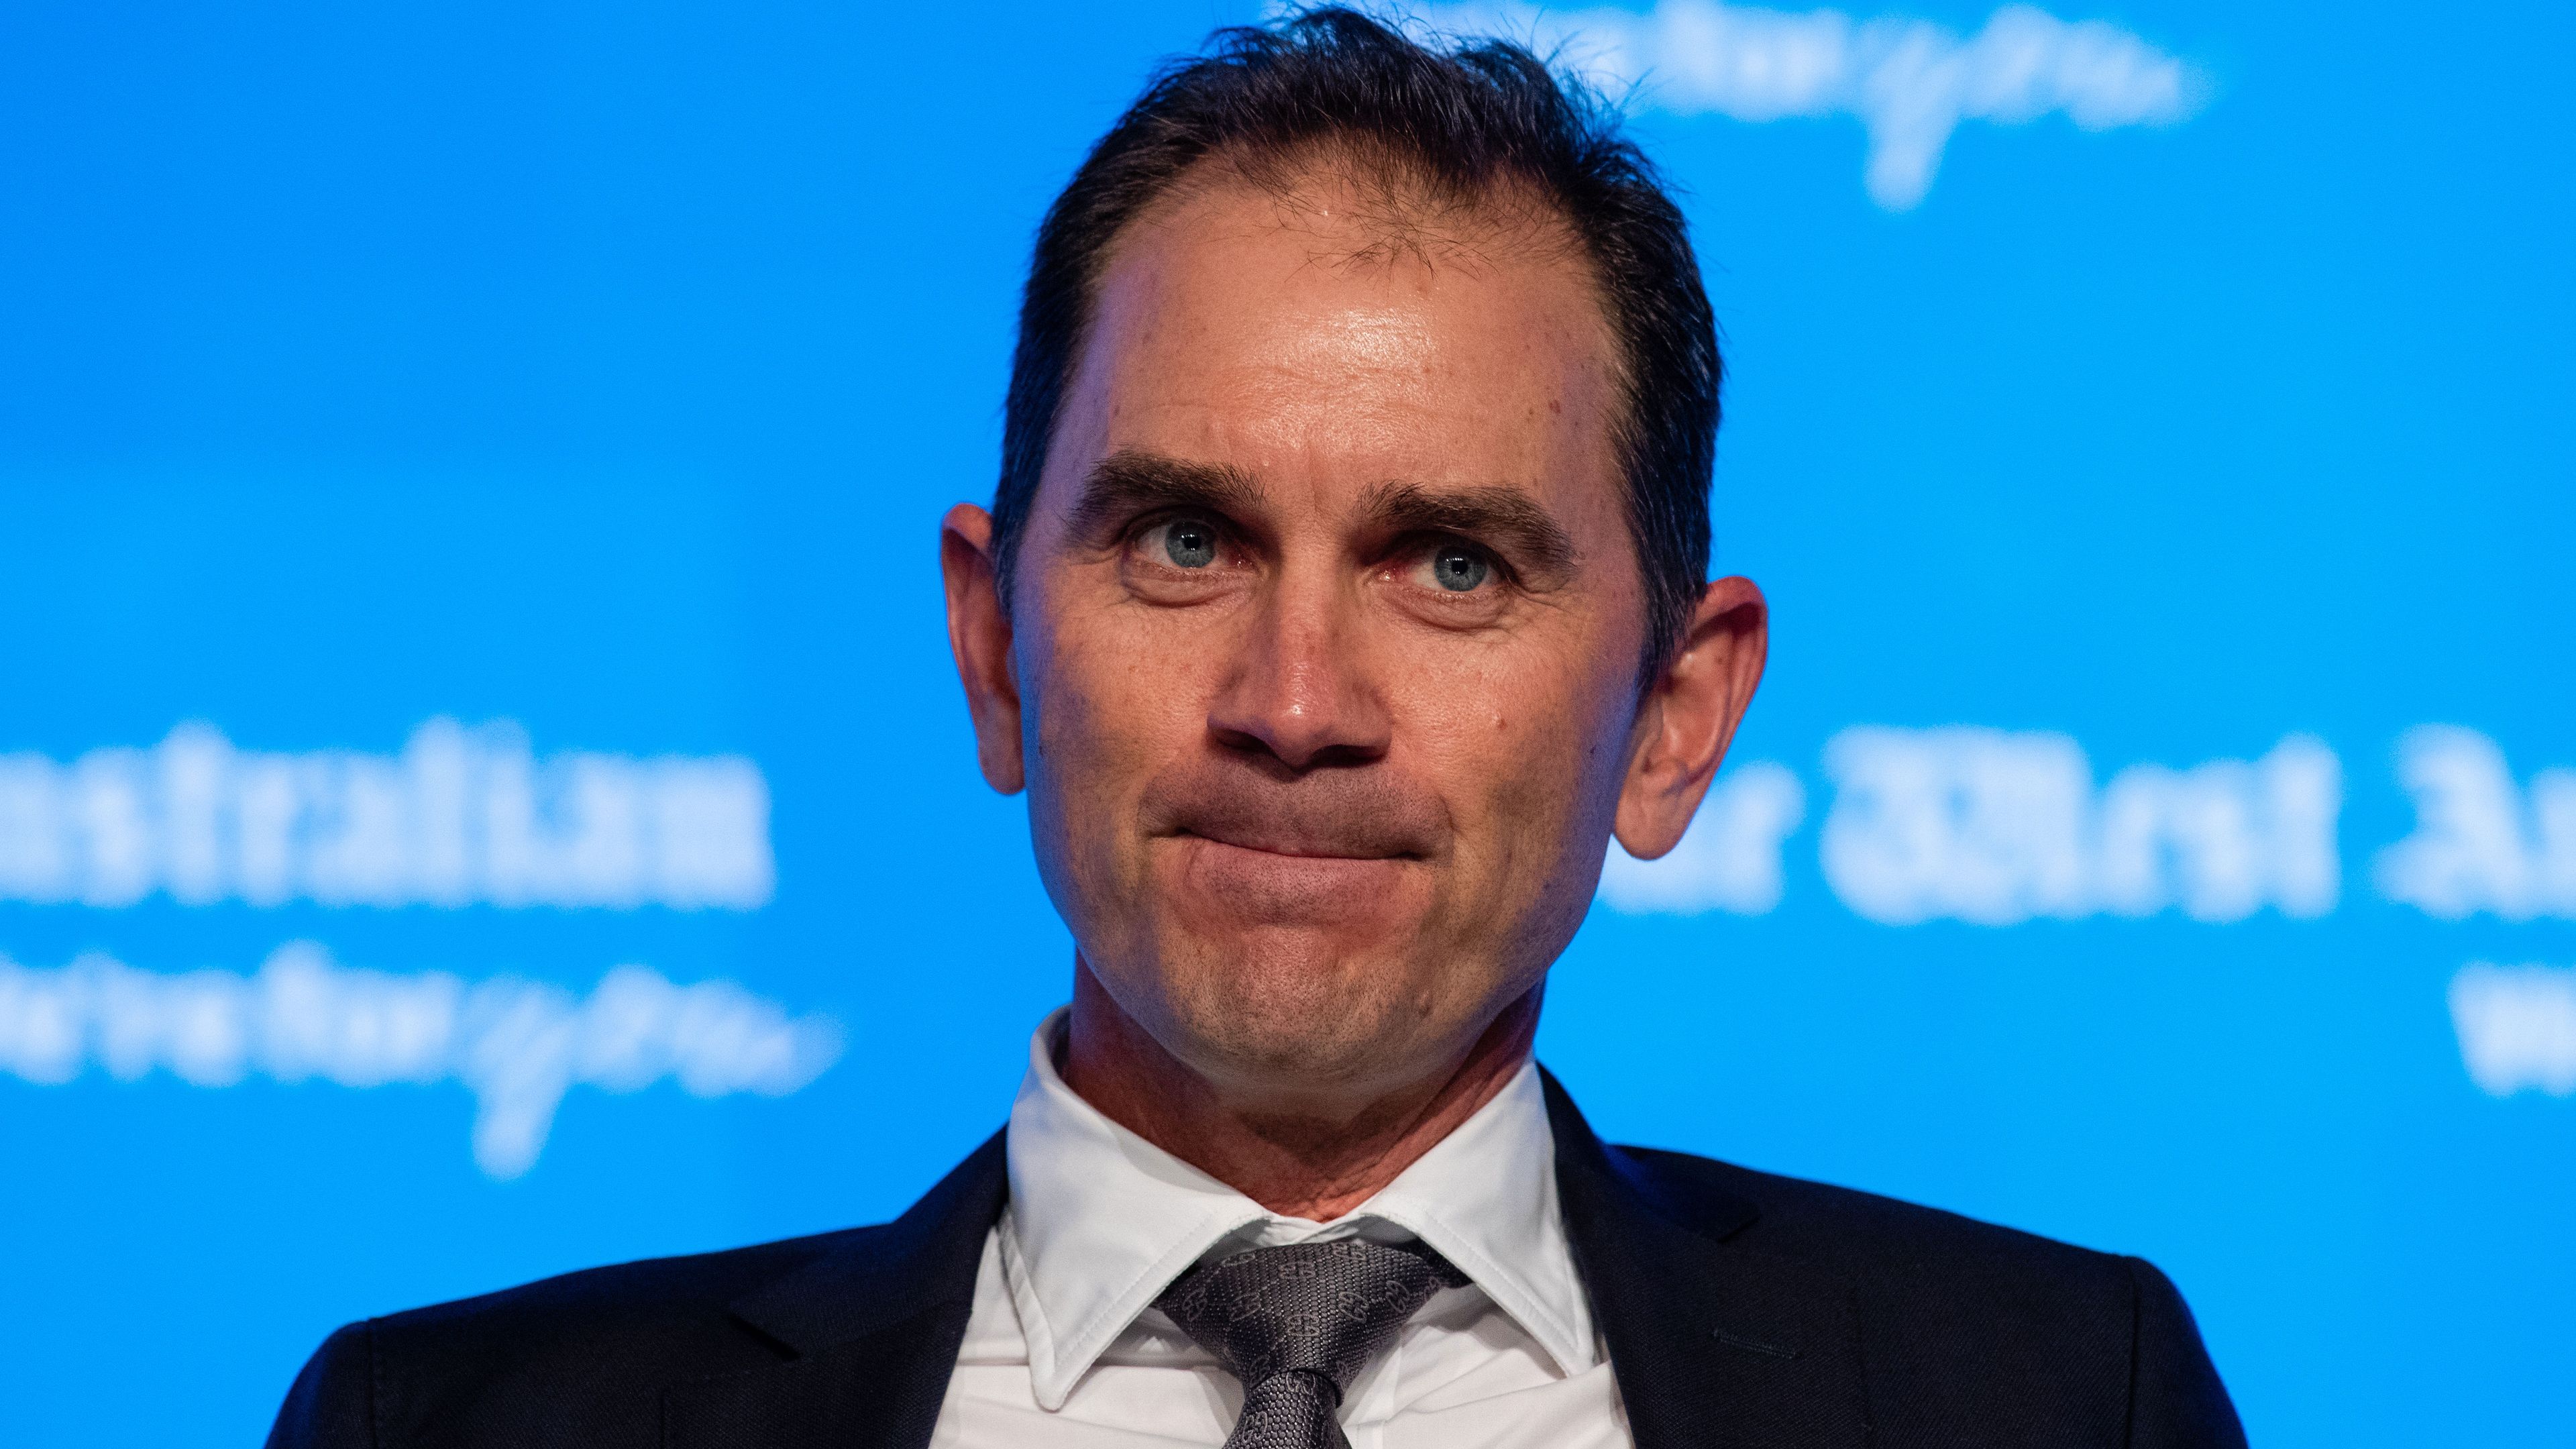 Australia coach Justin Langer reveals his first reaction to ball tampering scandal